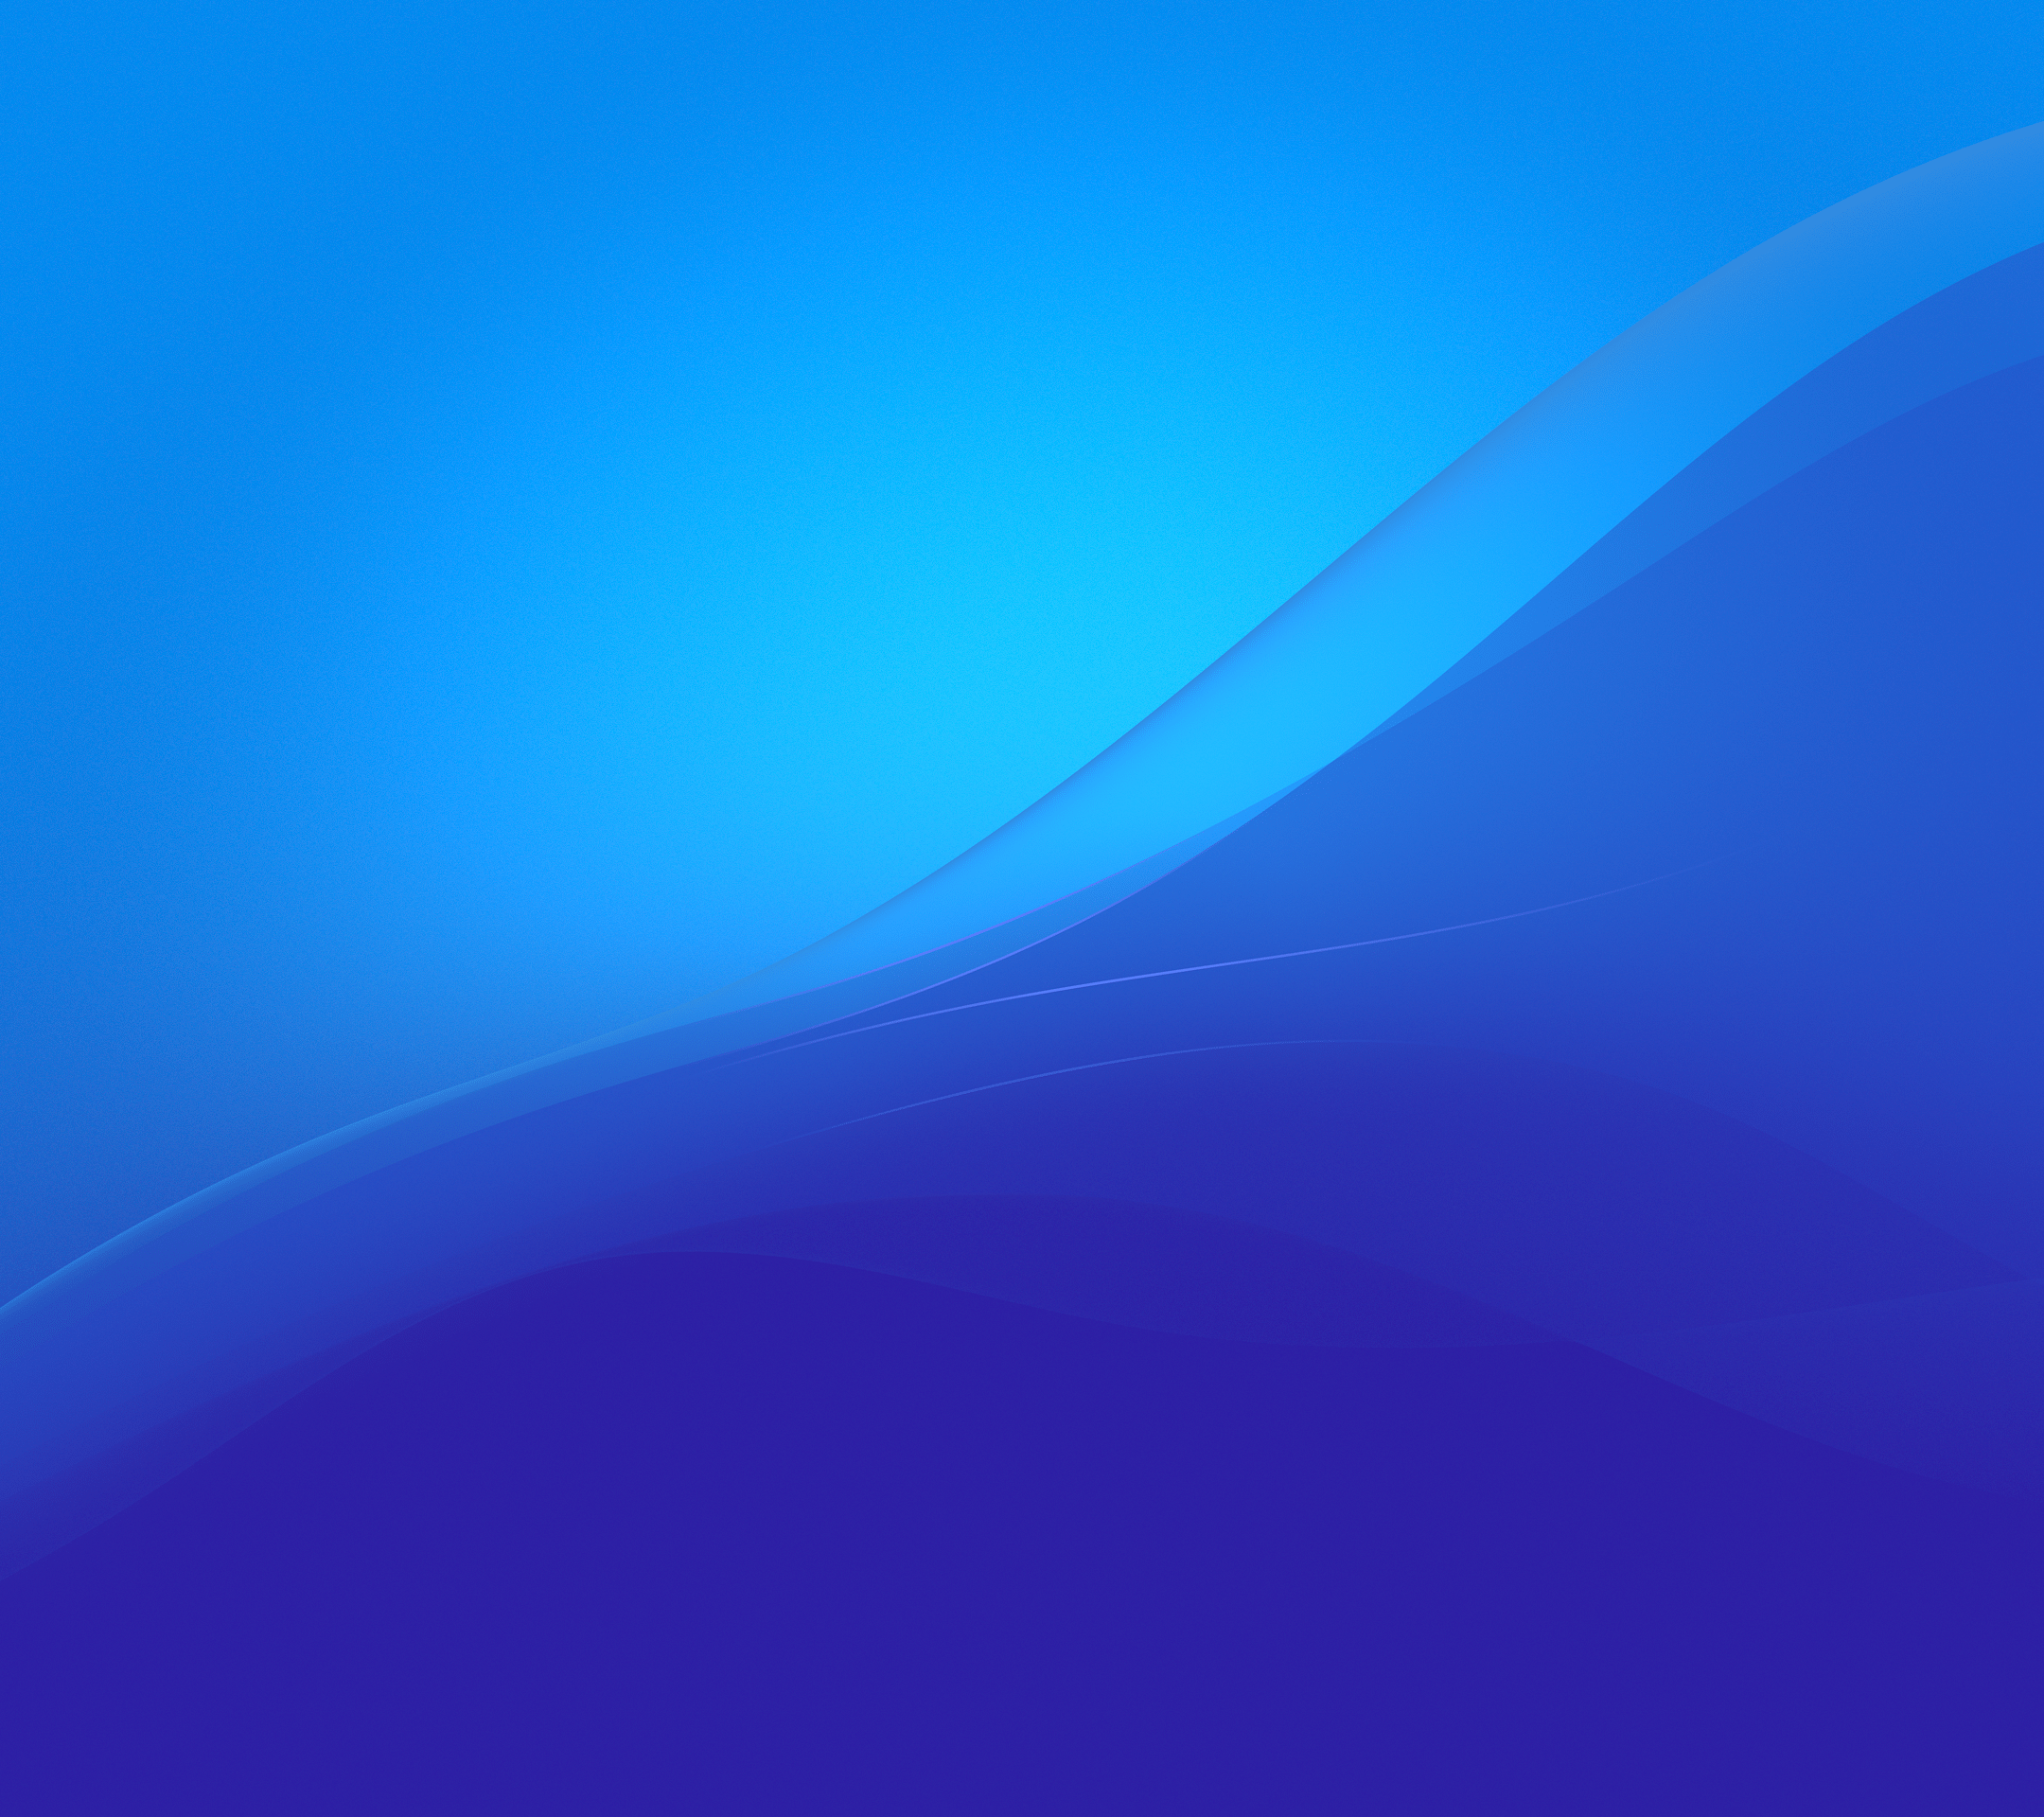 Sony Blue Wallpapers Top Free Sony Blue Backgrounds Wallpaperaccess